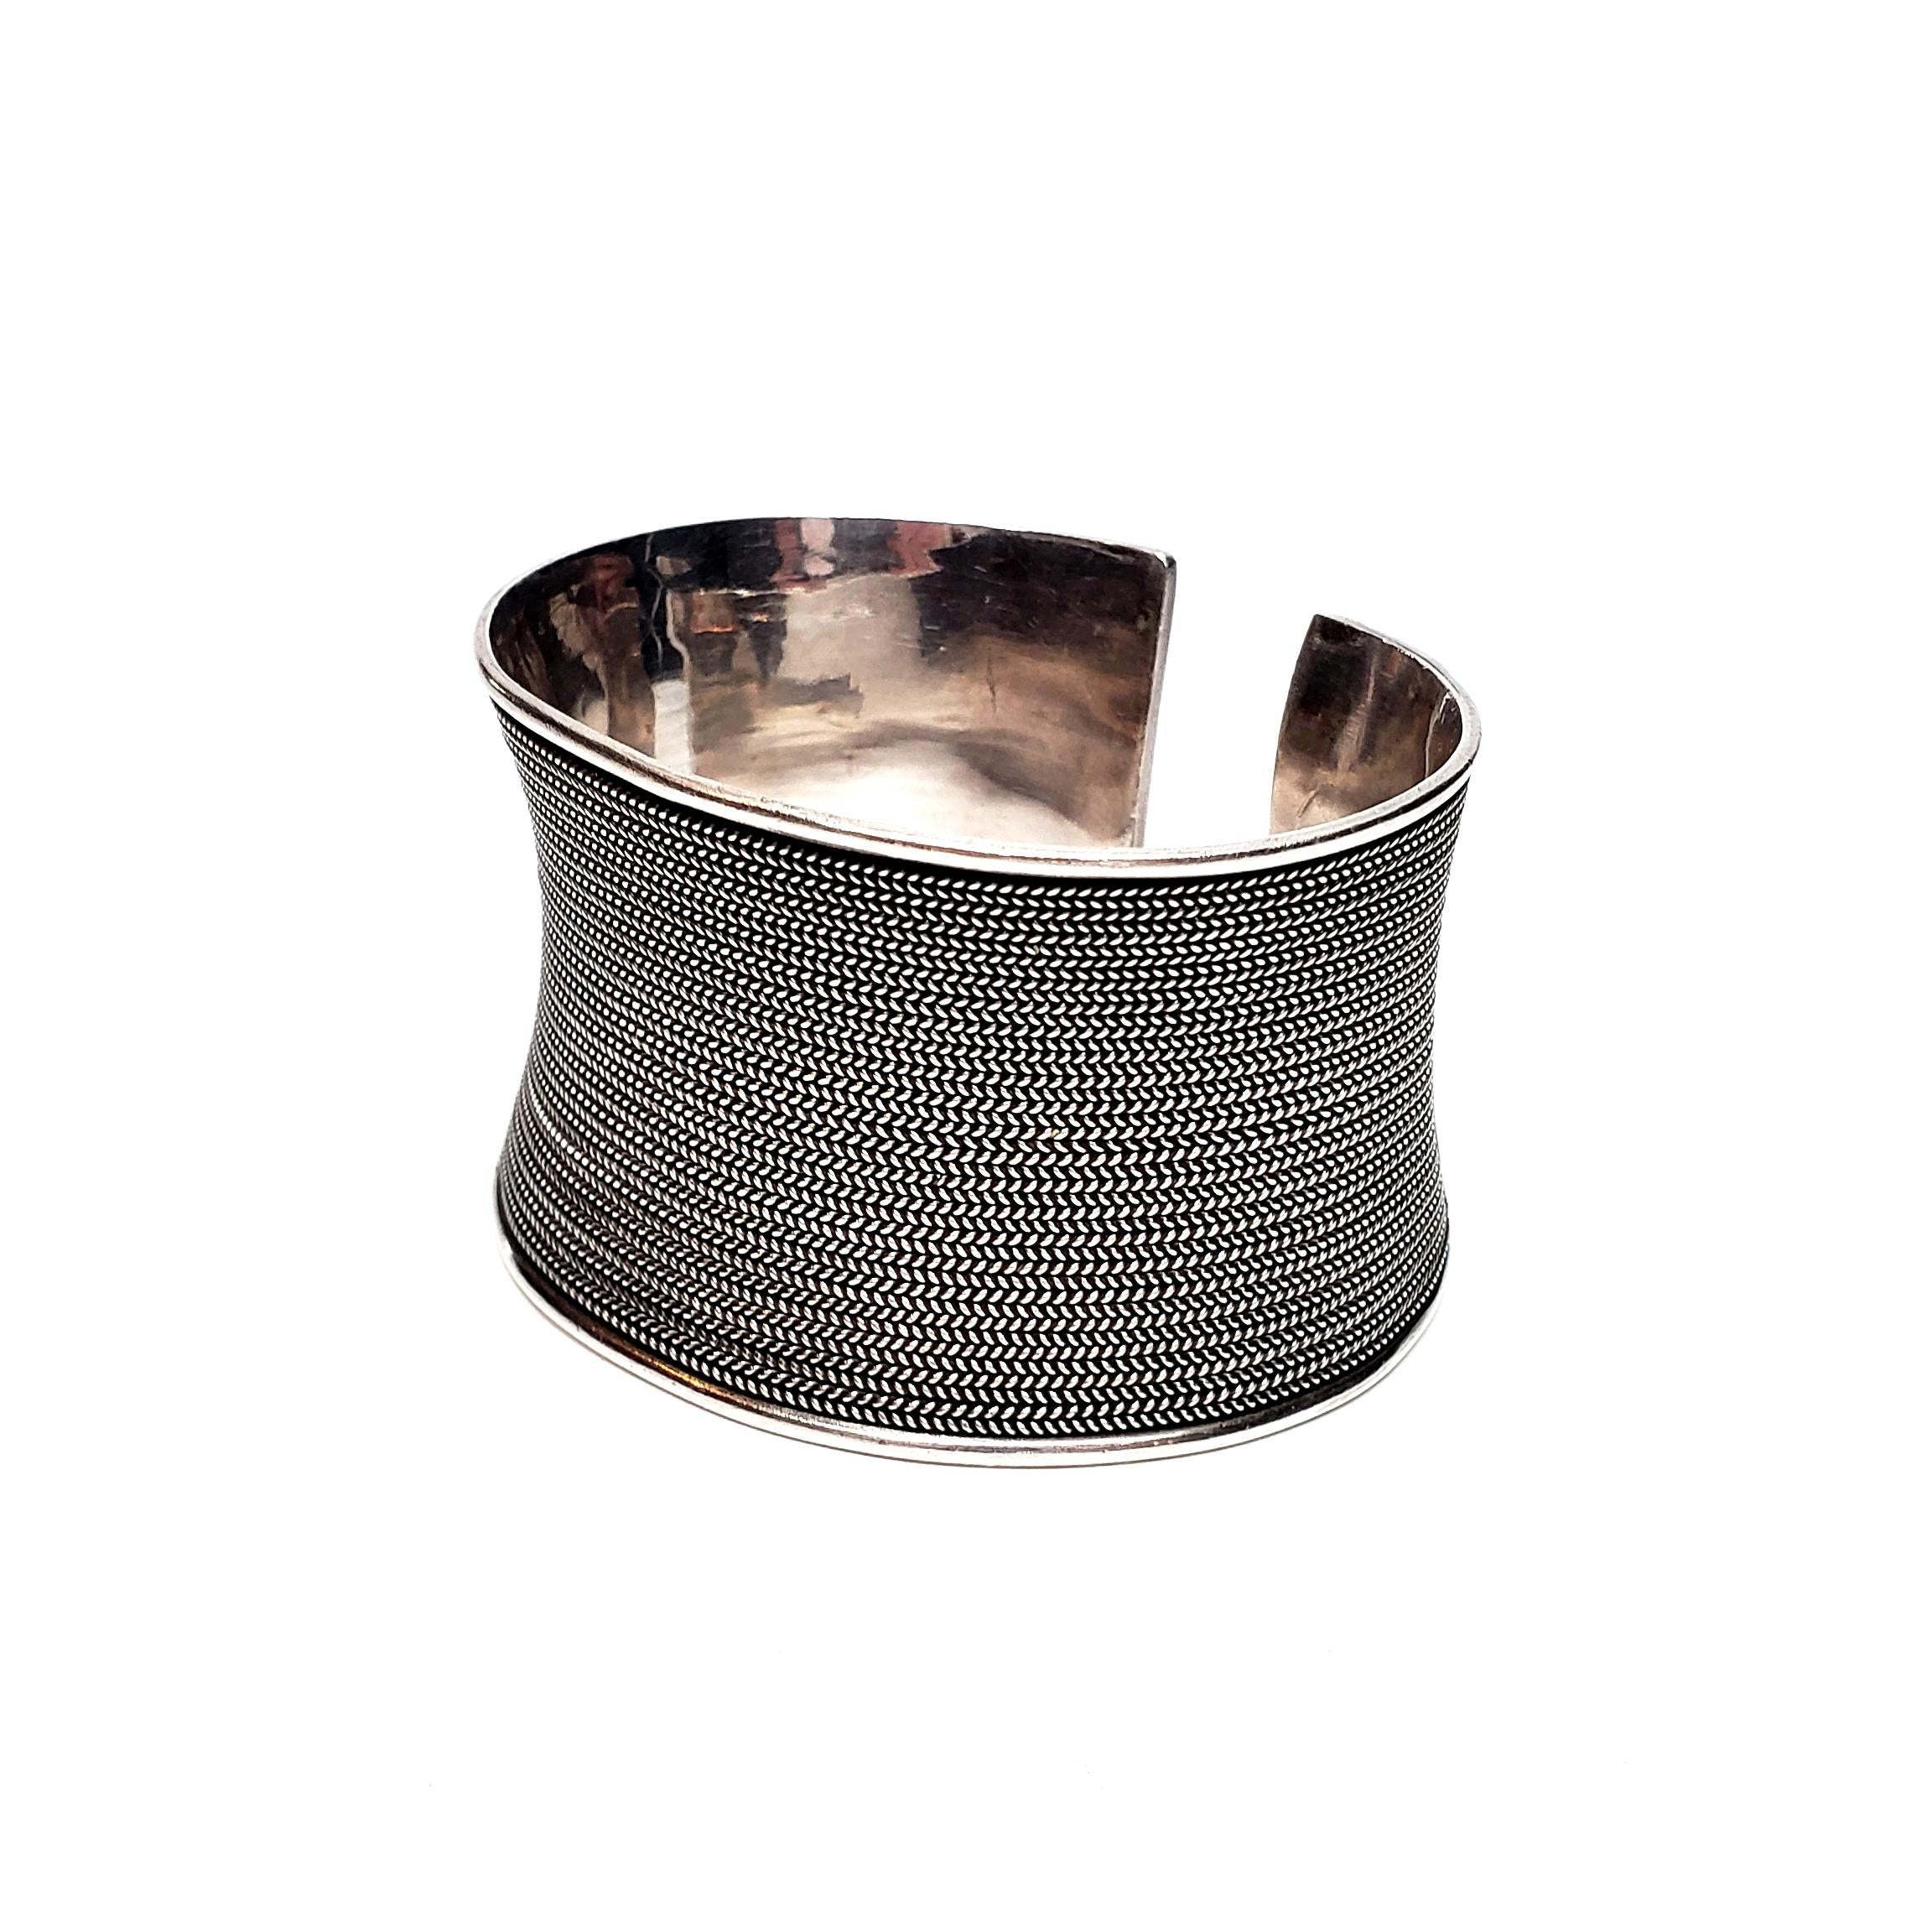 Sterling silver braided cuff by Suarti.

This handcrafted artisan piece features rows of rope twist design that give the overall look of braided silver. It is wide, but lightweight.

Measures approx 6